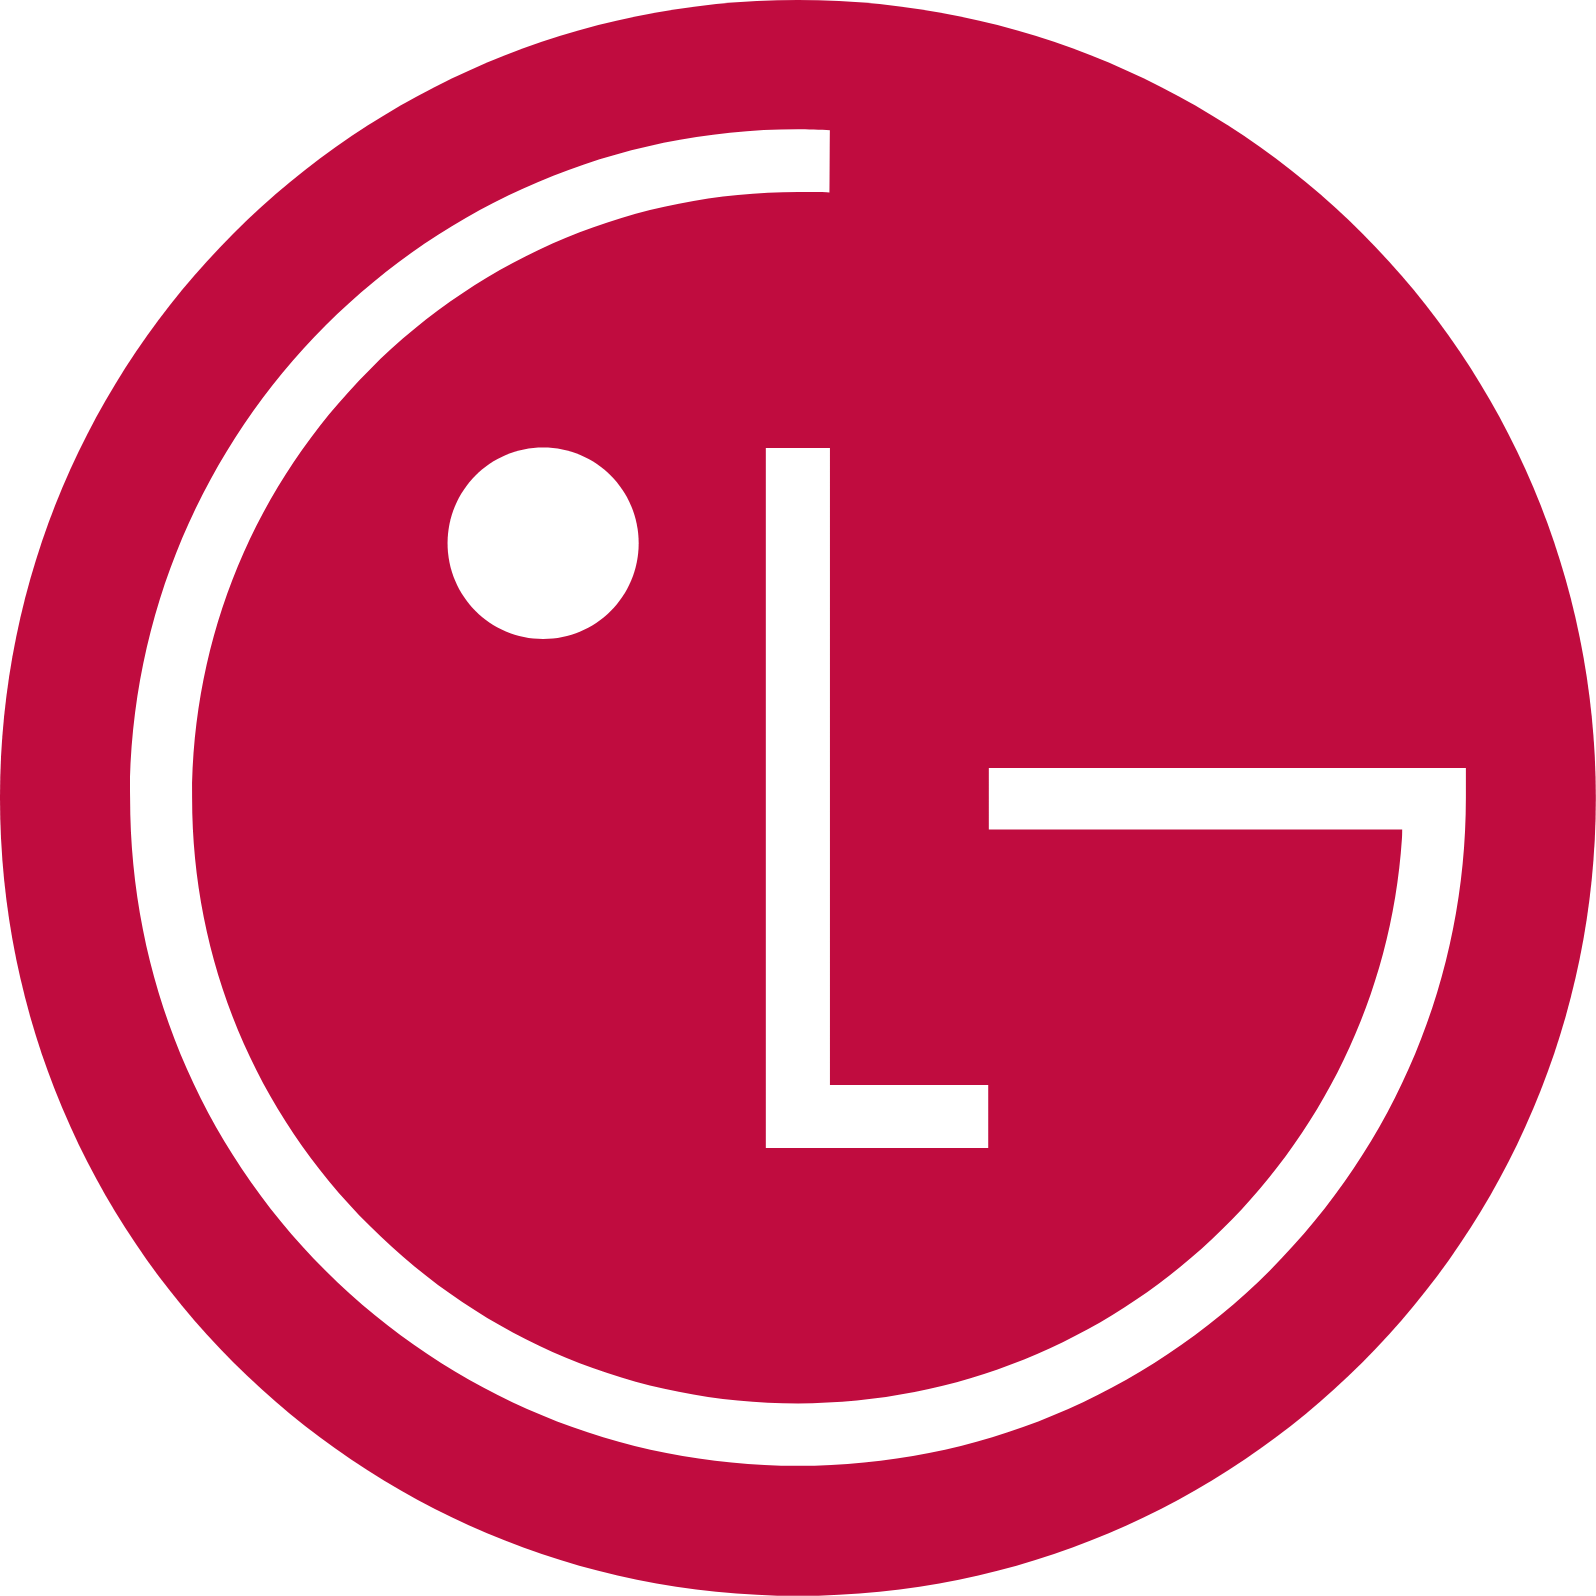 LG Display logo in transparent PNG and vectorized SVG formats